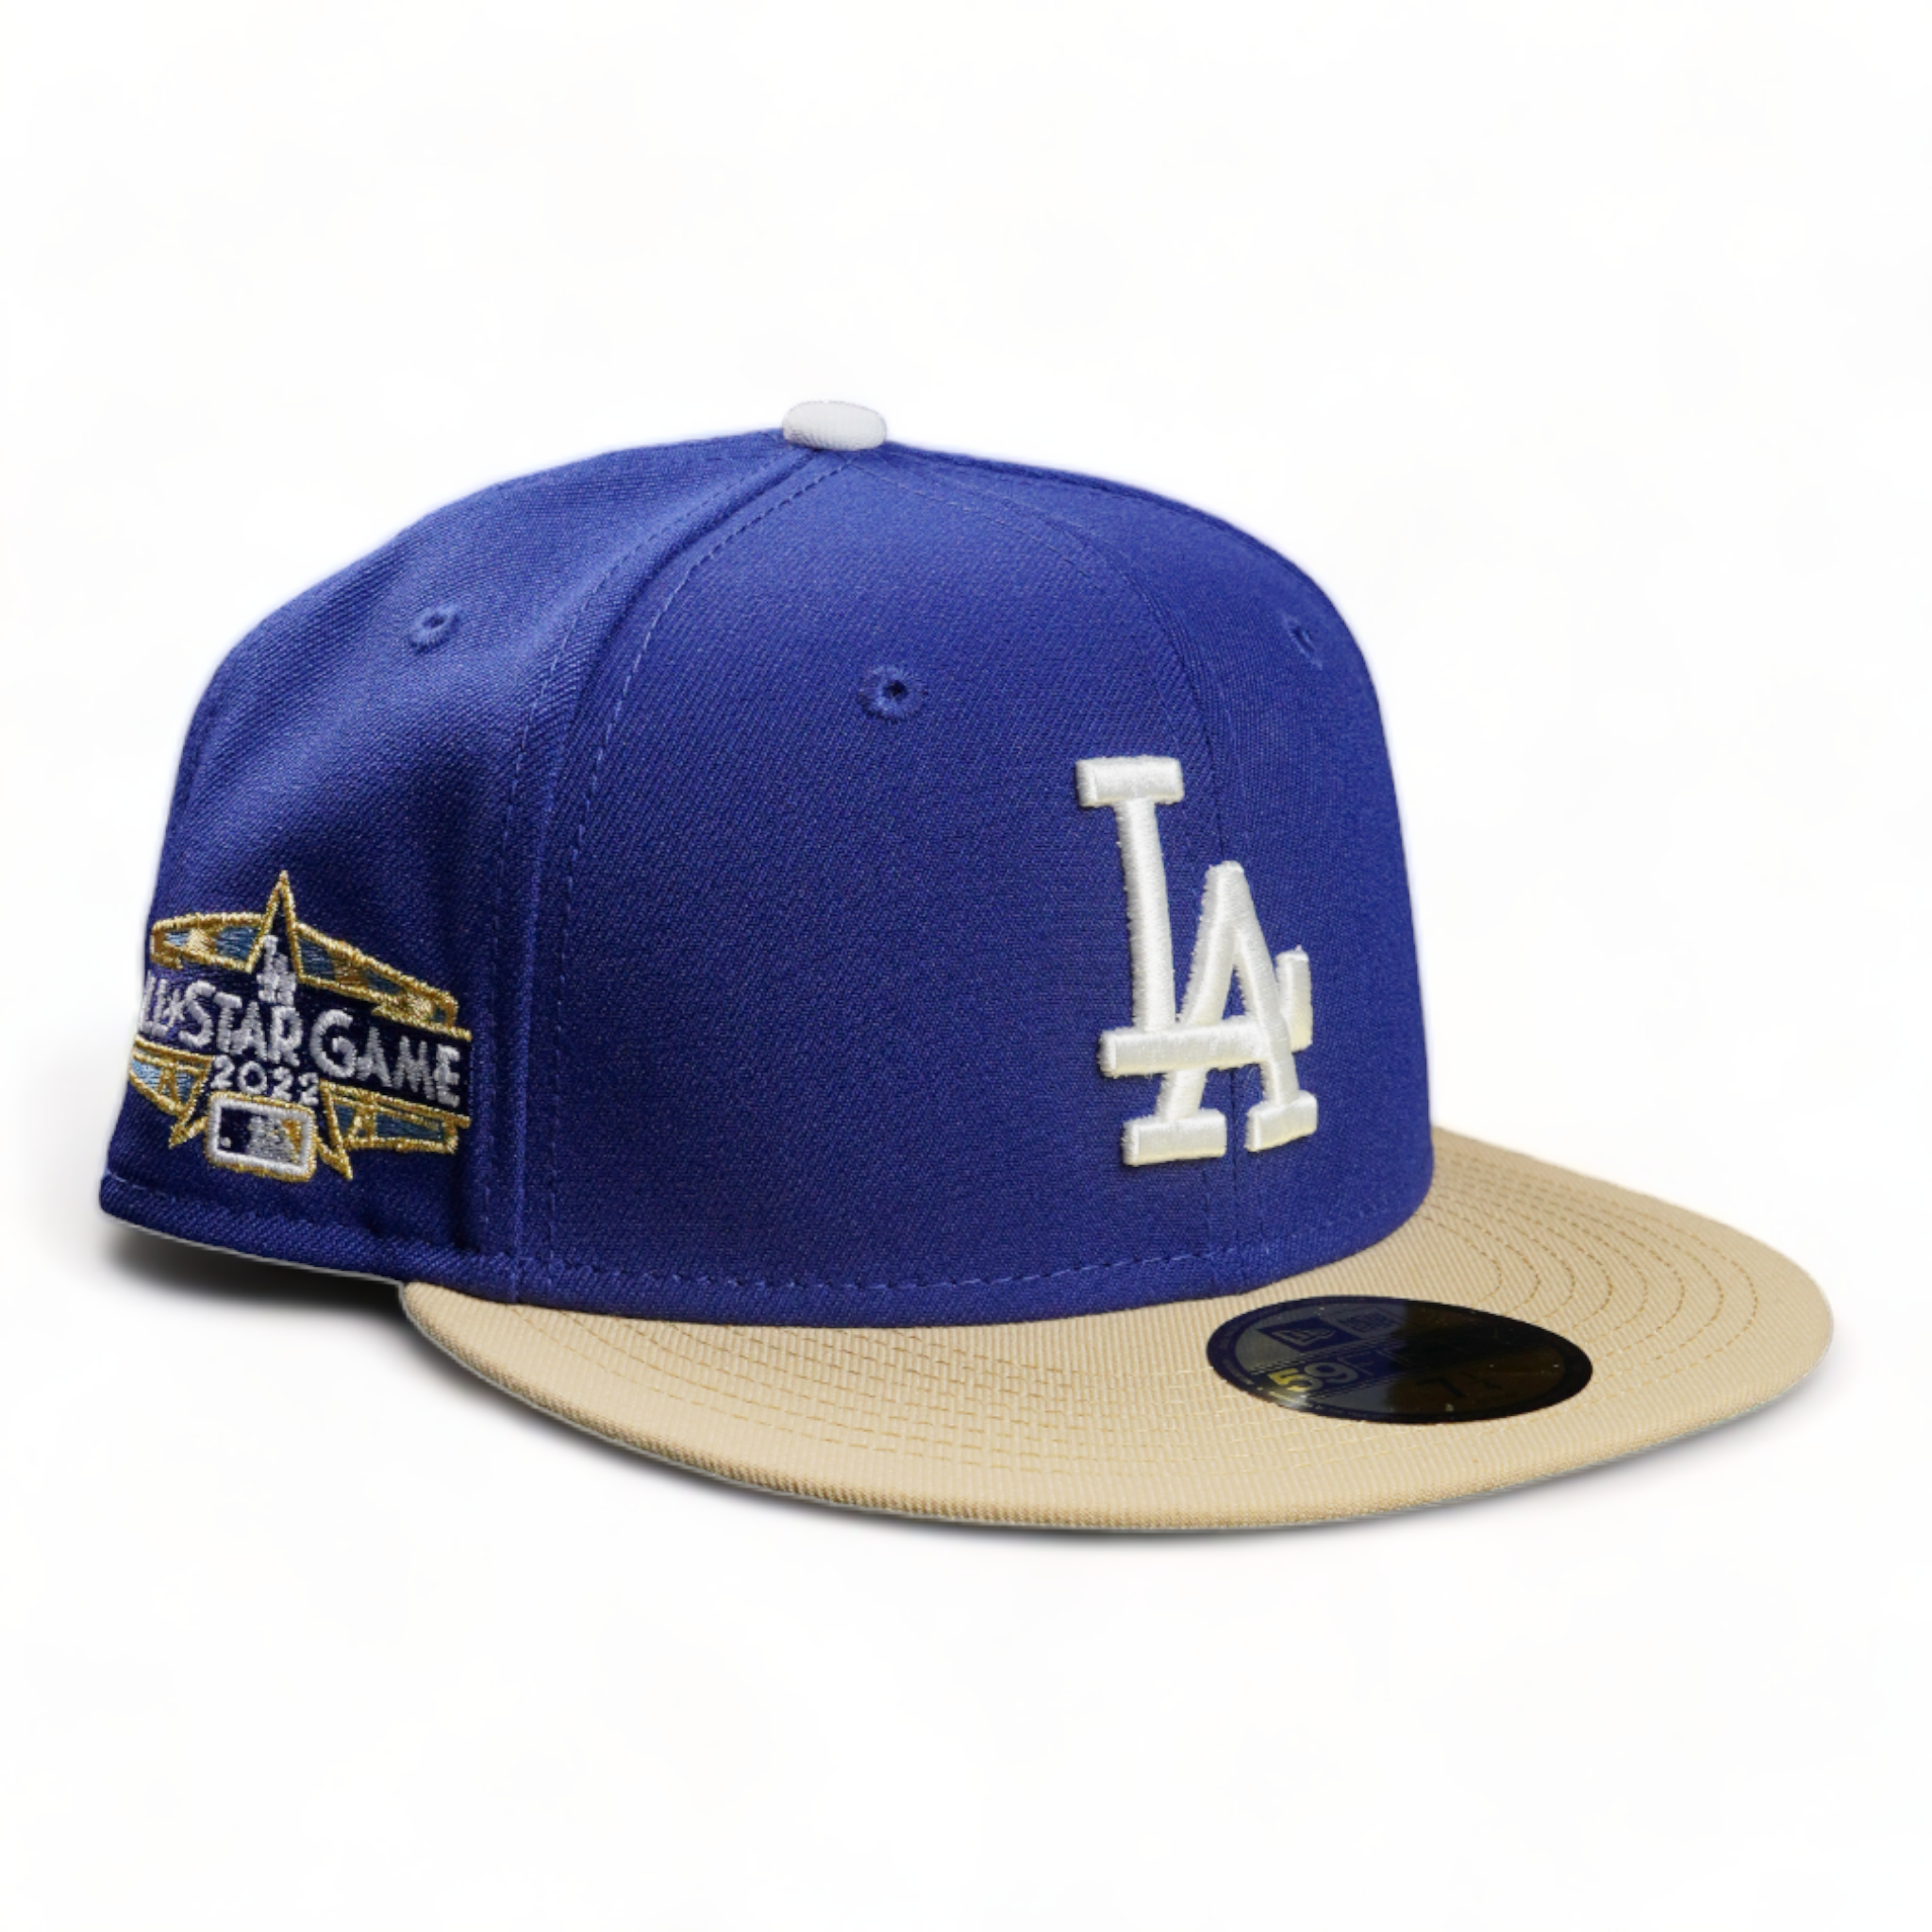 New Era 59Fifty Fitted Los Angeles Dodgers (Dark Royal/Vegas Gold 22 ASG Patch)